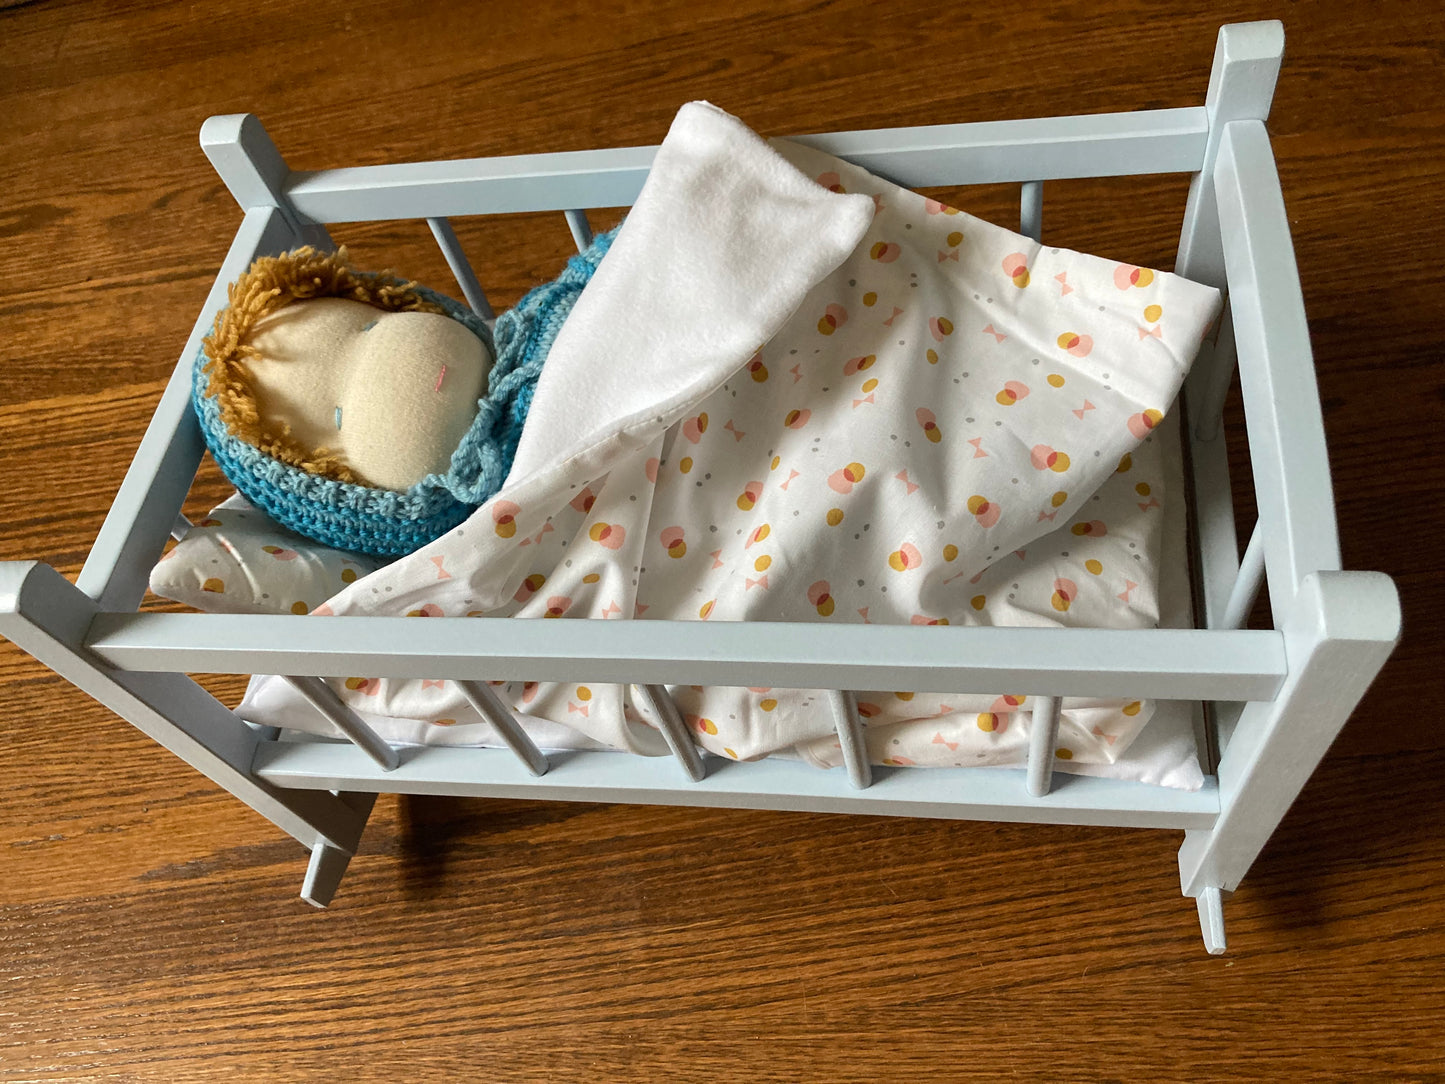 Dolls, Beds and Carriers - Wooden CRADLE, with Cotton Bedding!